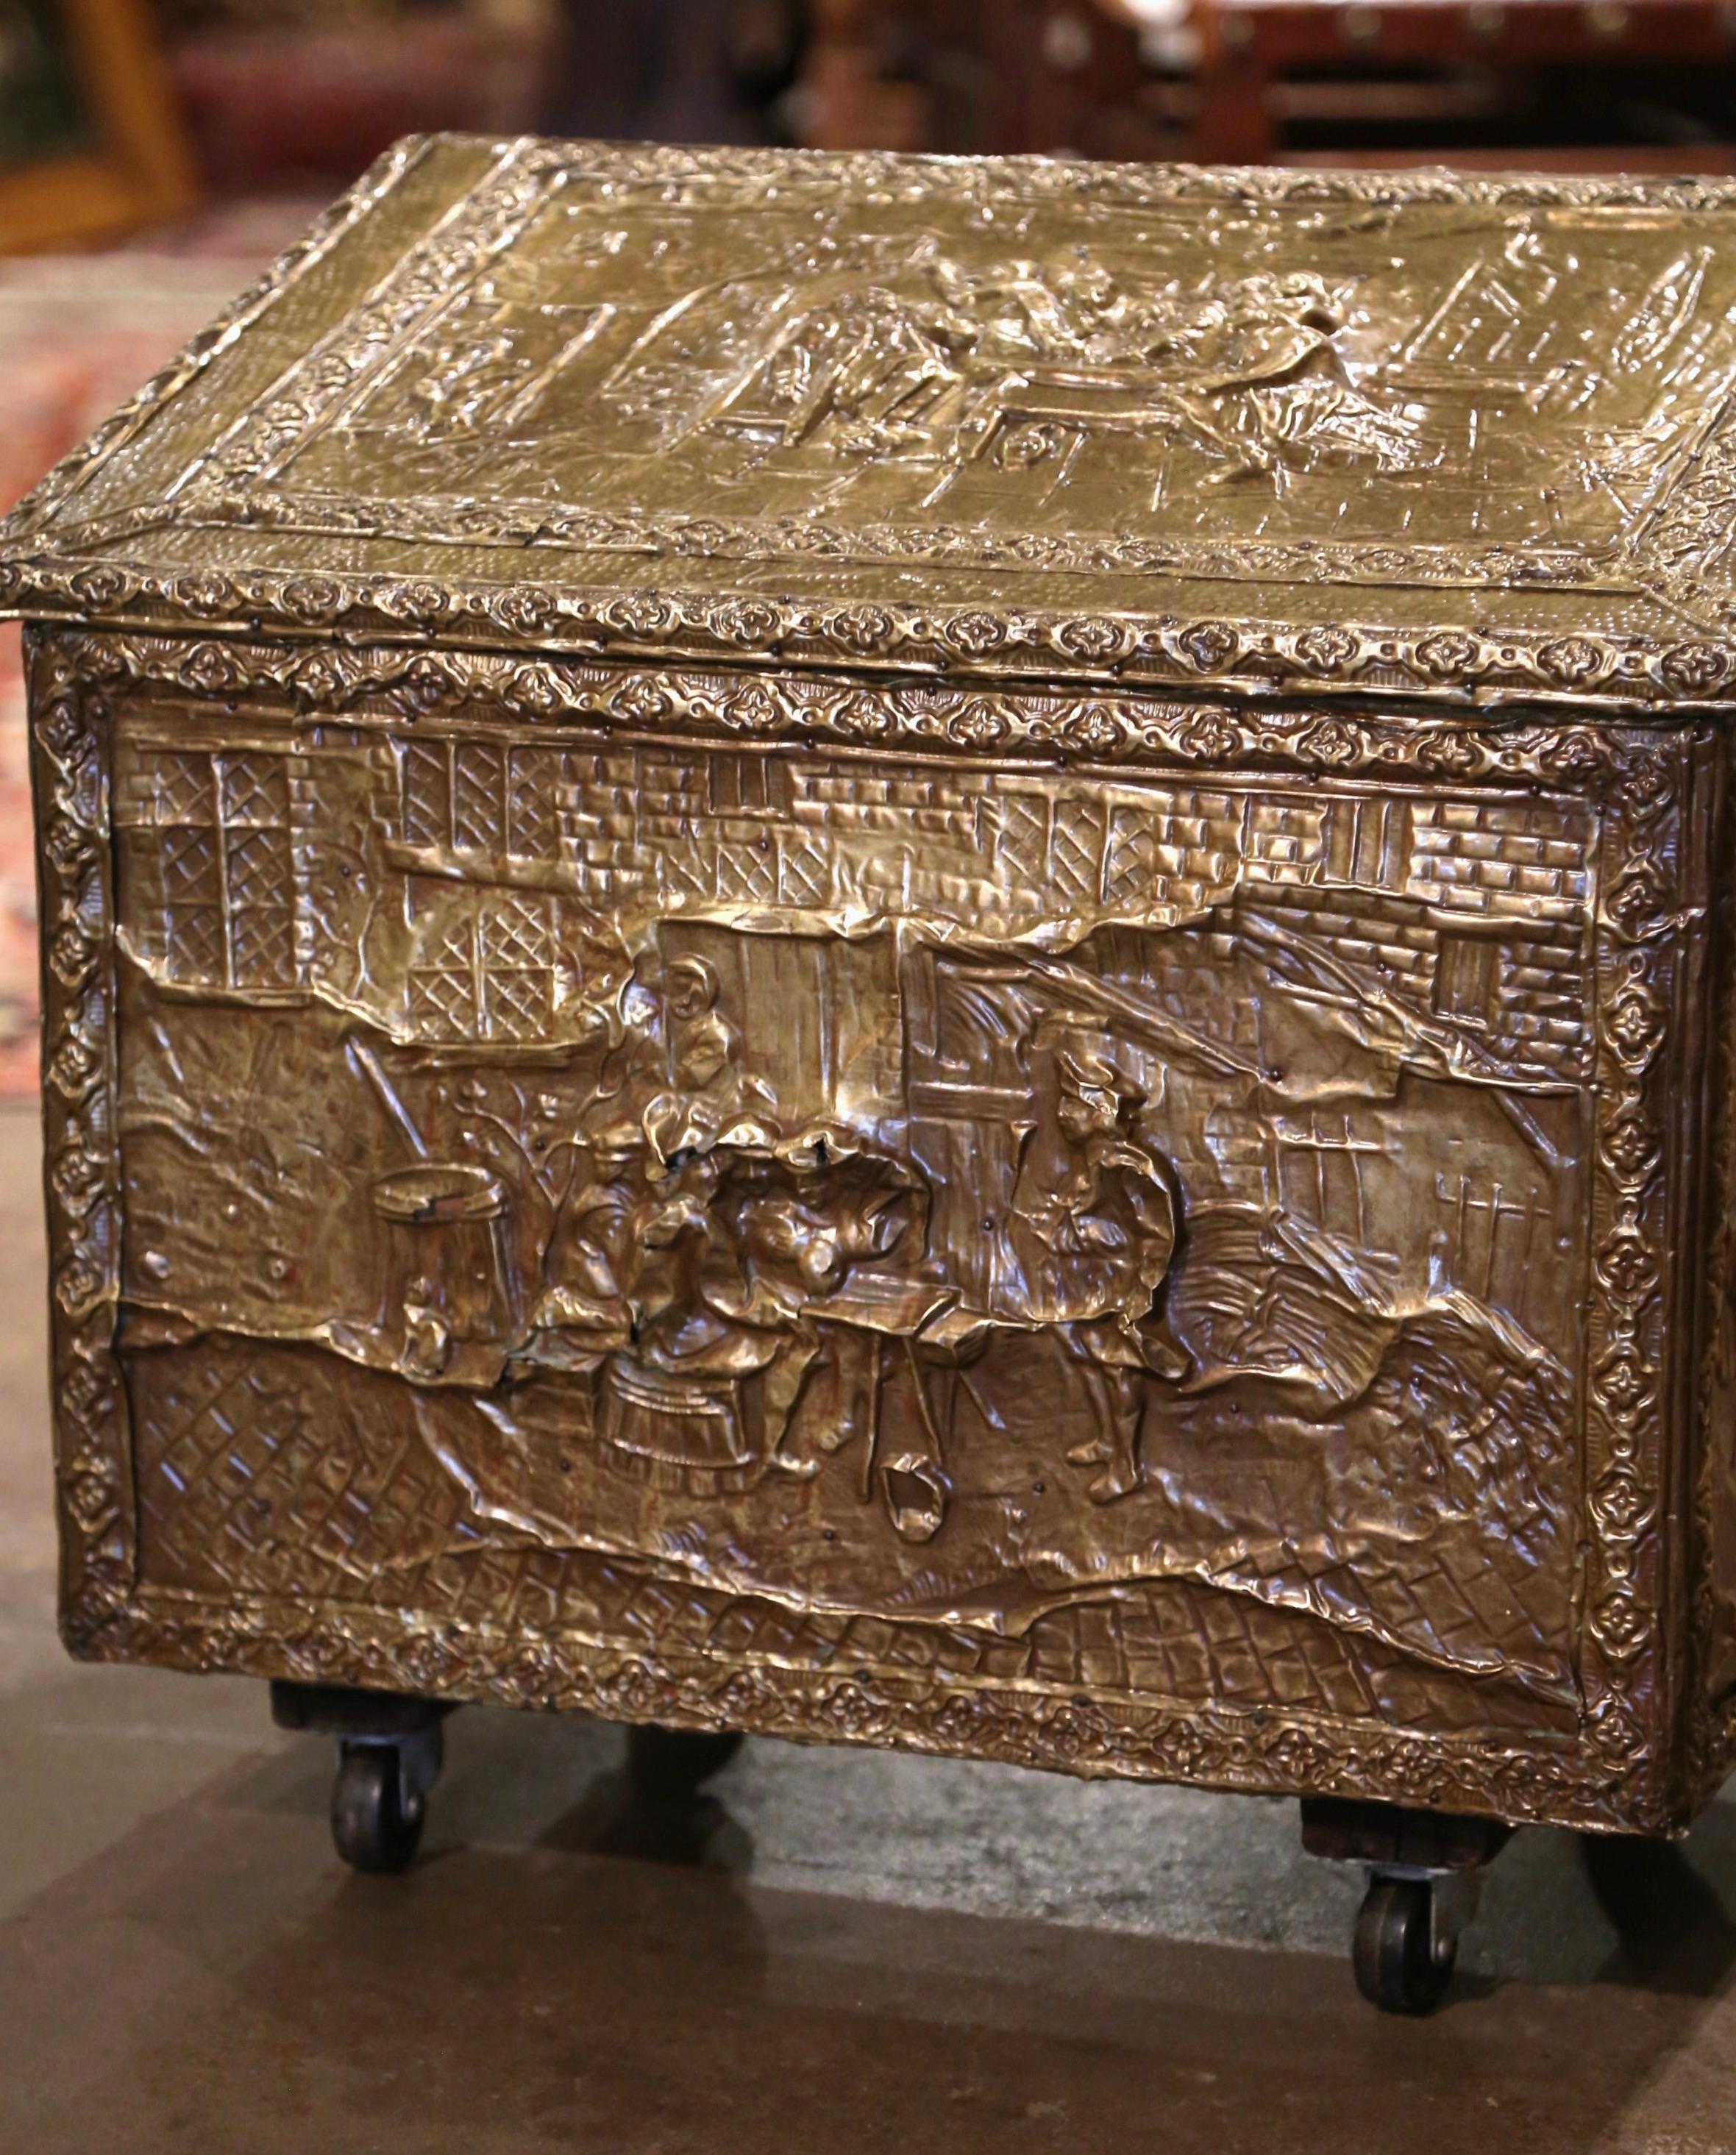 Patinated Early 20th Century French Repousse Brass and Wooden Firewood Box on Wheels For Sale